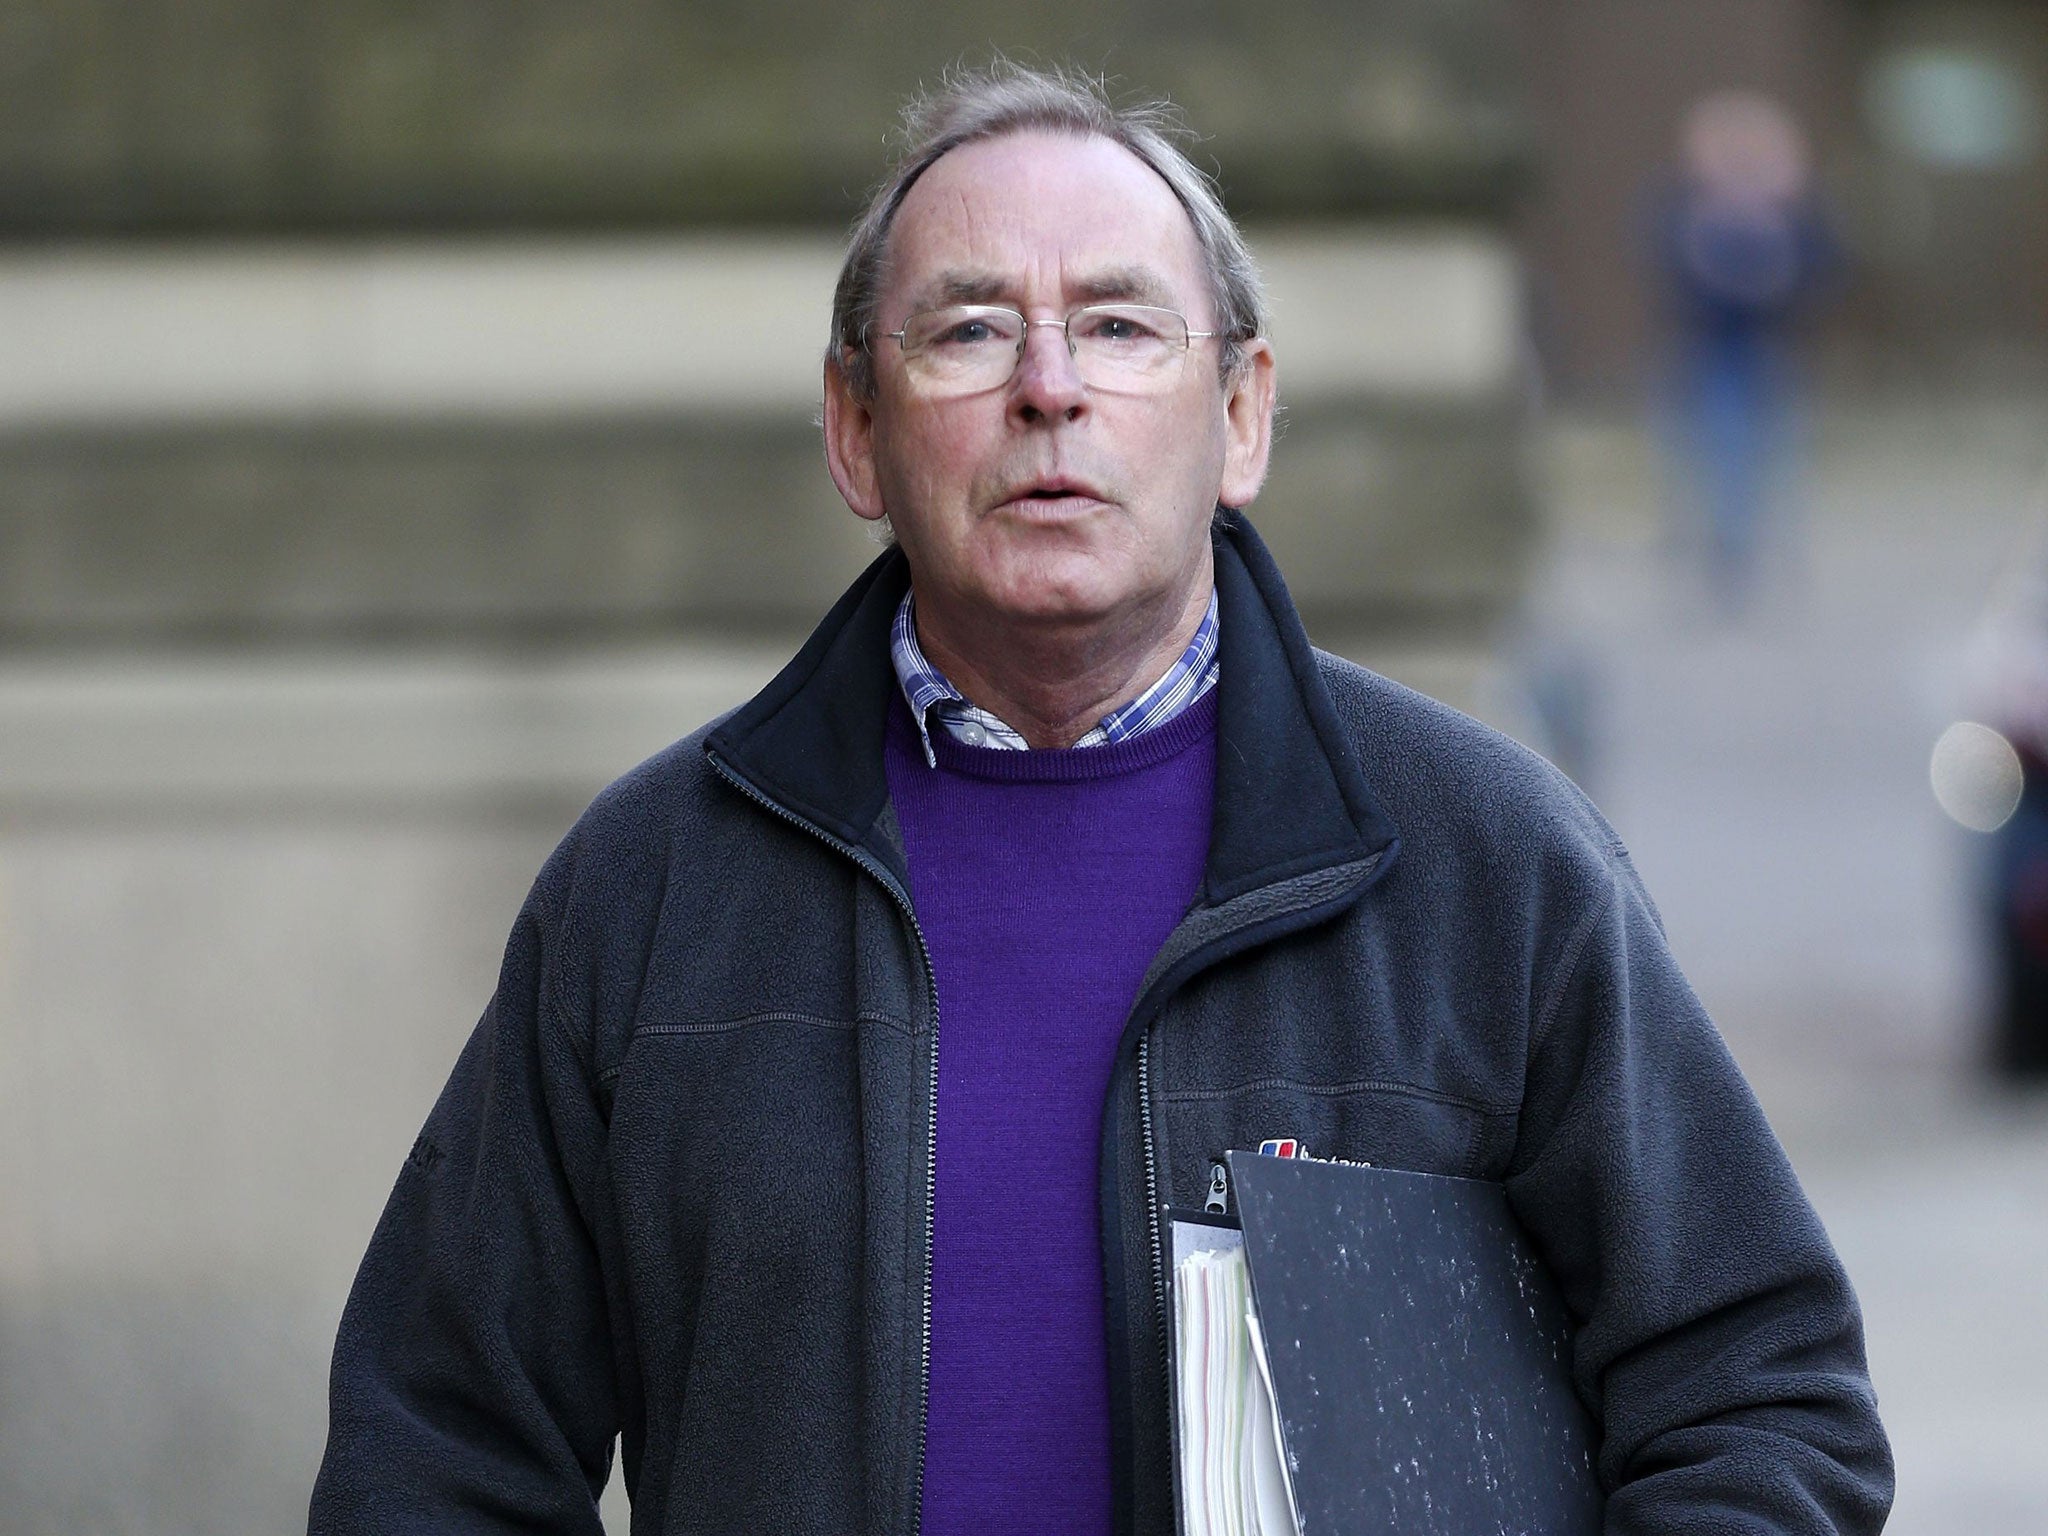 Former television weather presenter Fred Talbot arrives to start giving his evidence at Manchester's Minshull Street Court, where he is standing trial charged with historical sexual offences